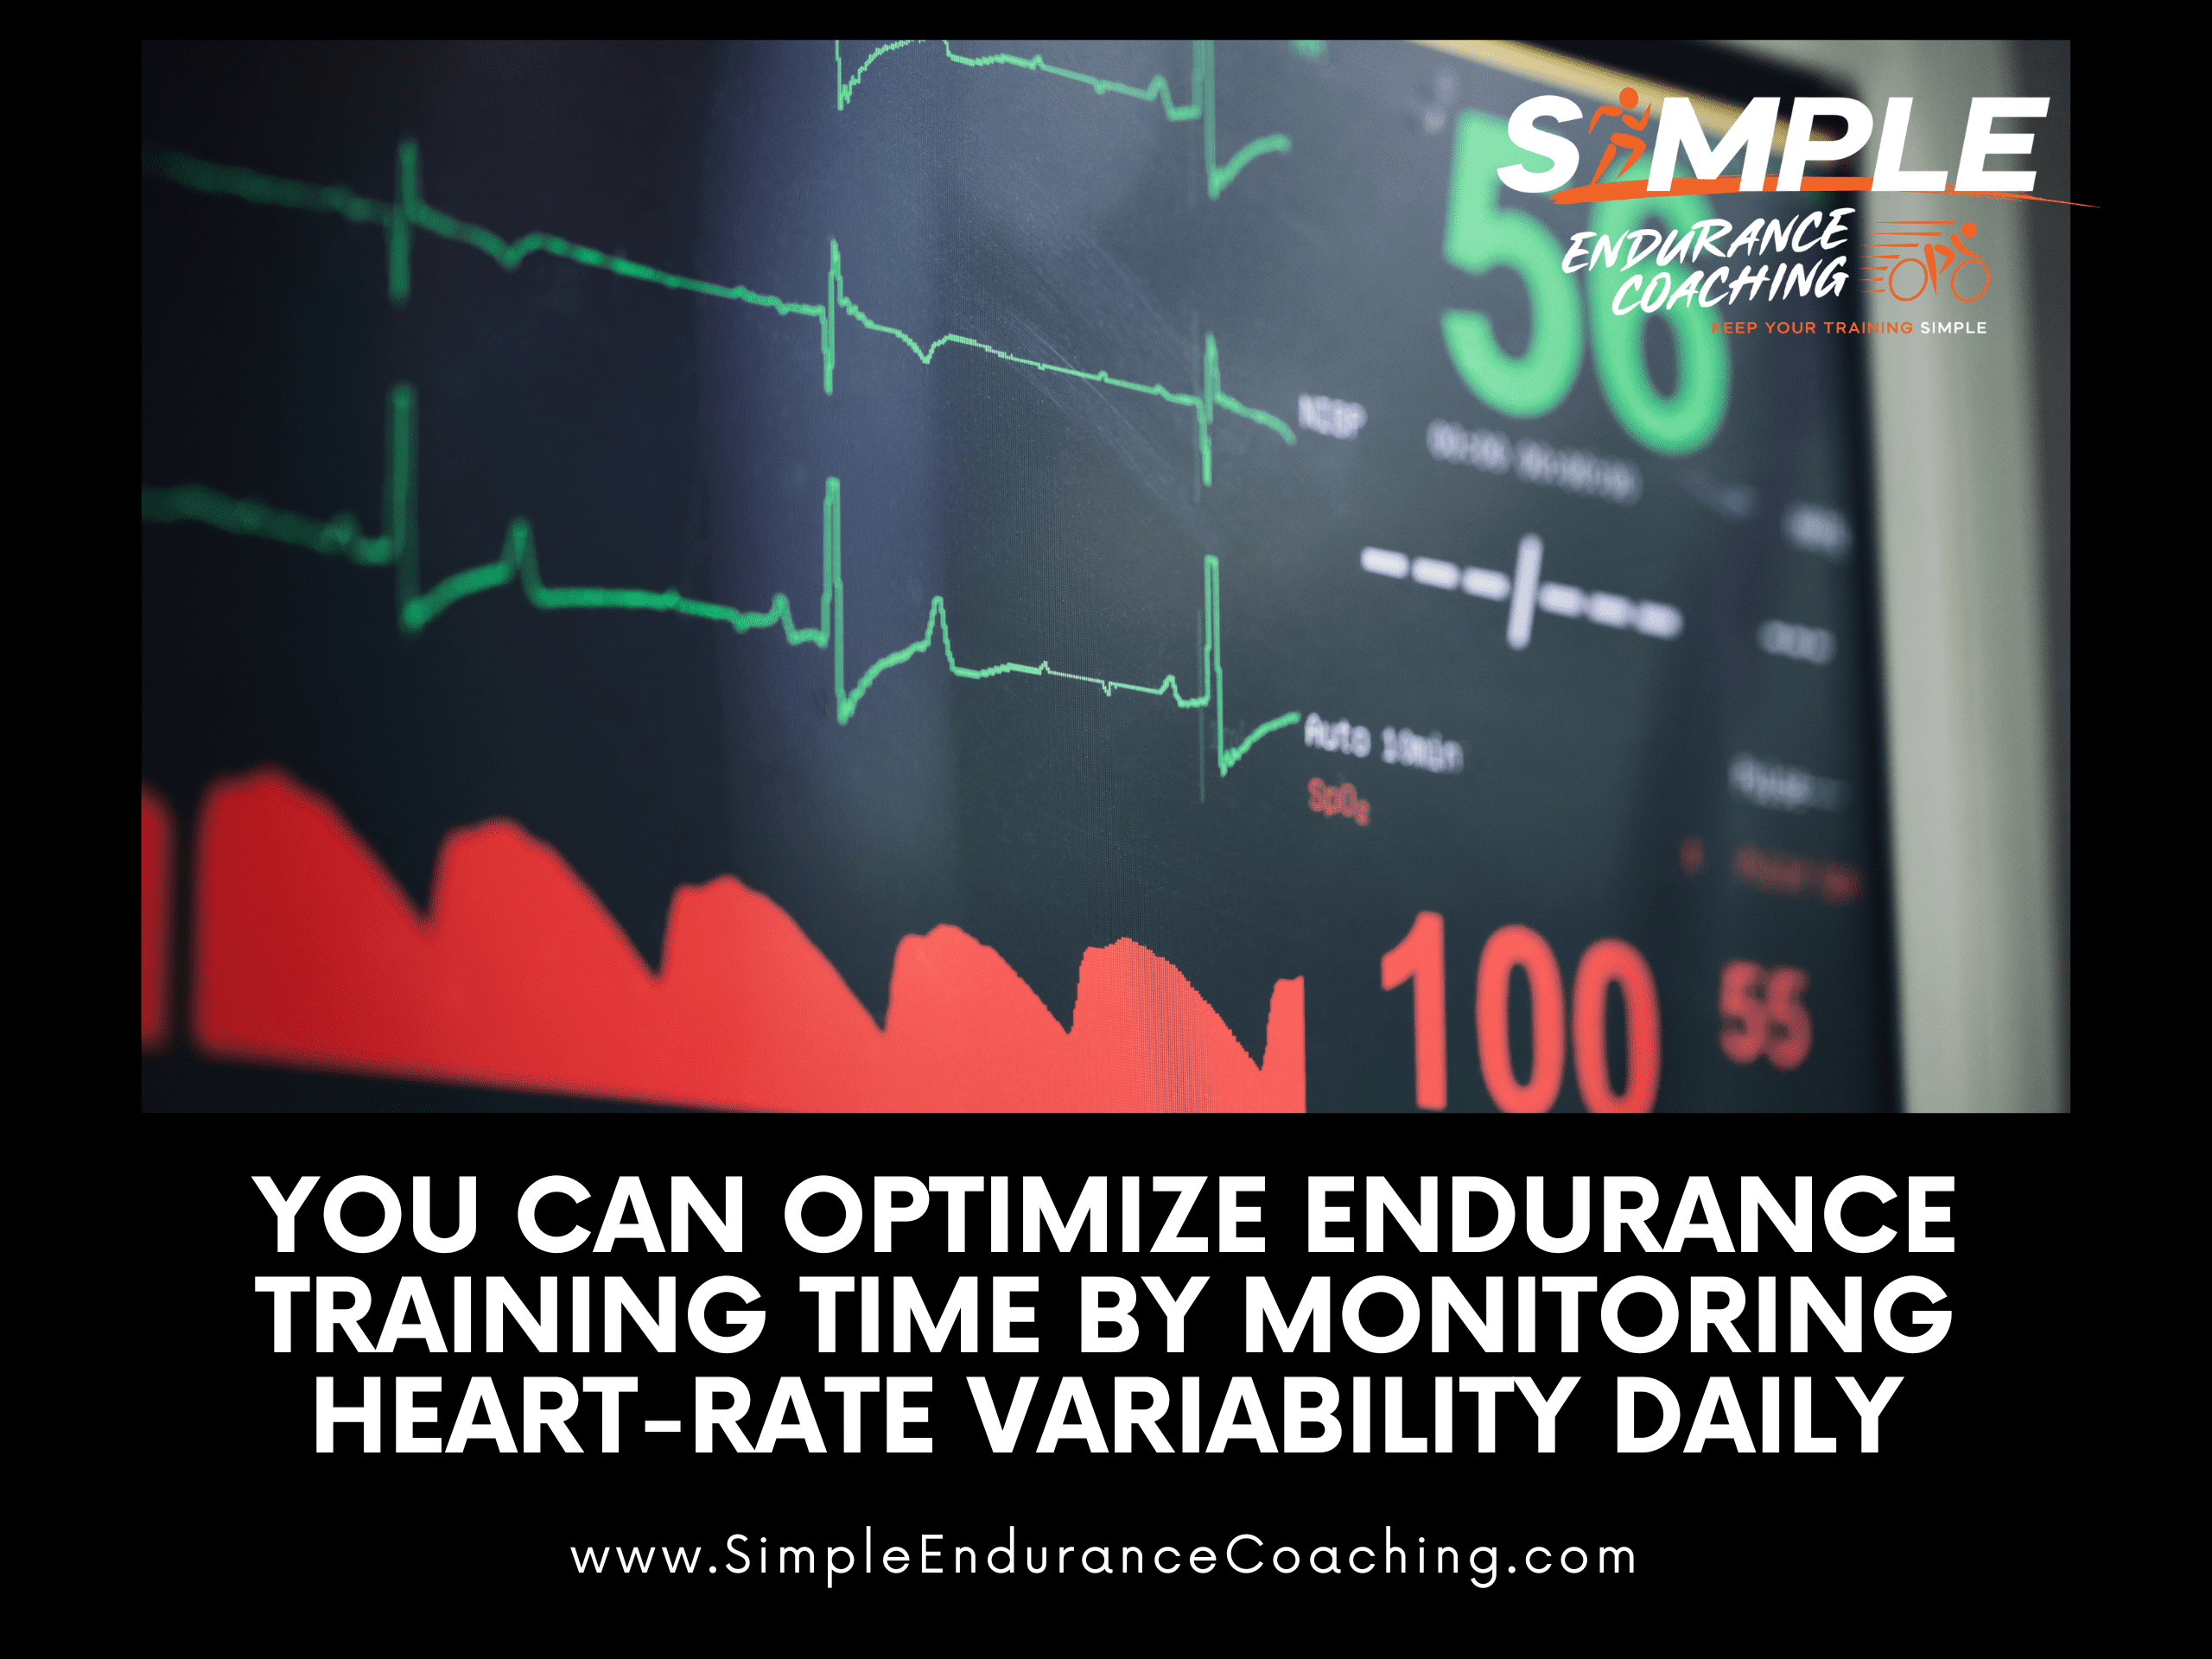 You can optimize endurance training time by monitoring heart-rate variability daily